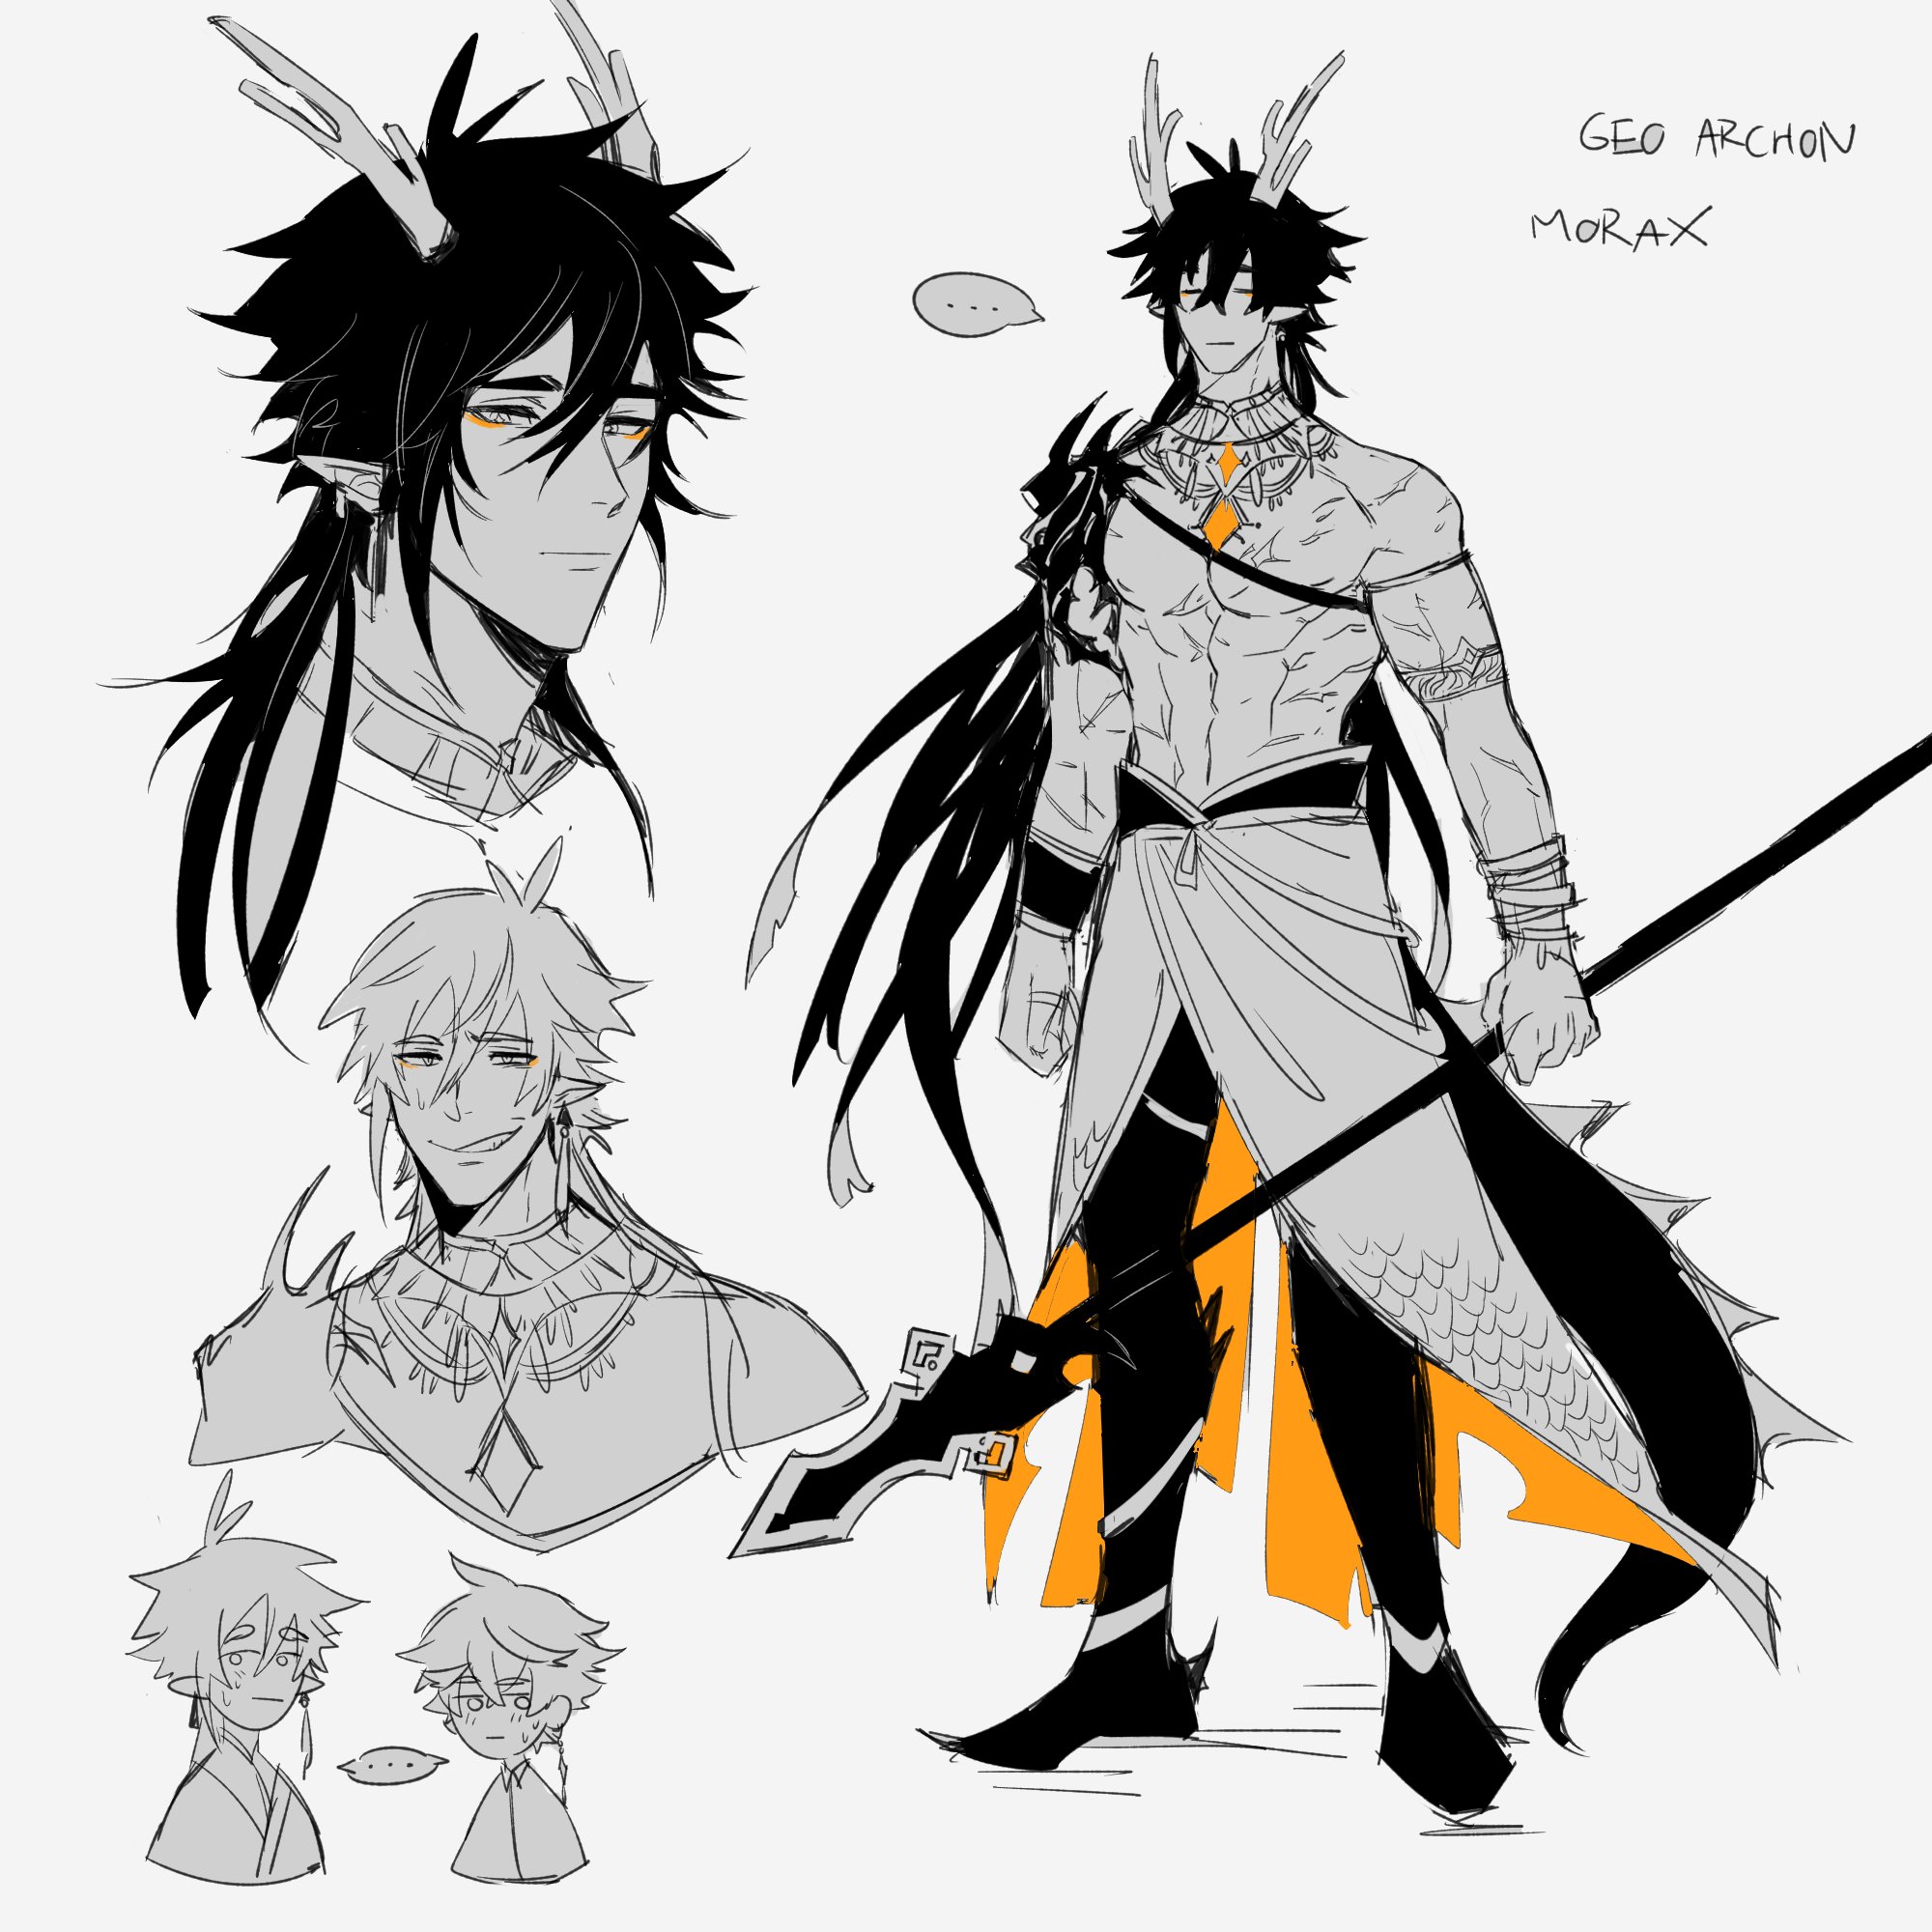 Zook Archon Au Doodles For Childe And Zhongli Genshinimpact